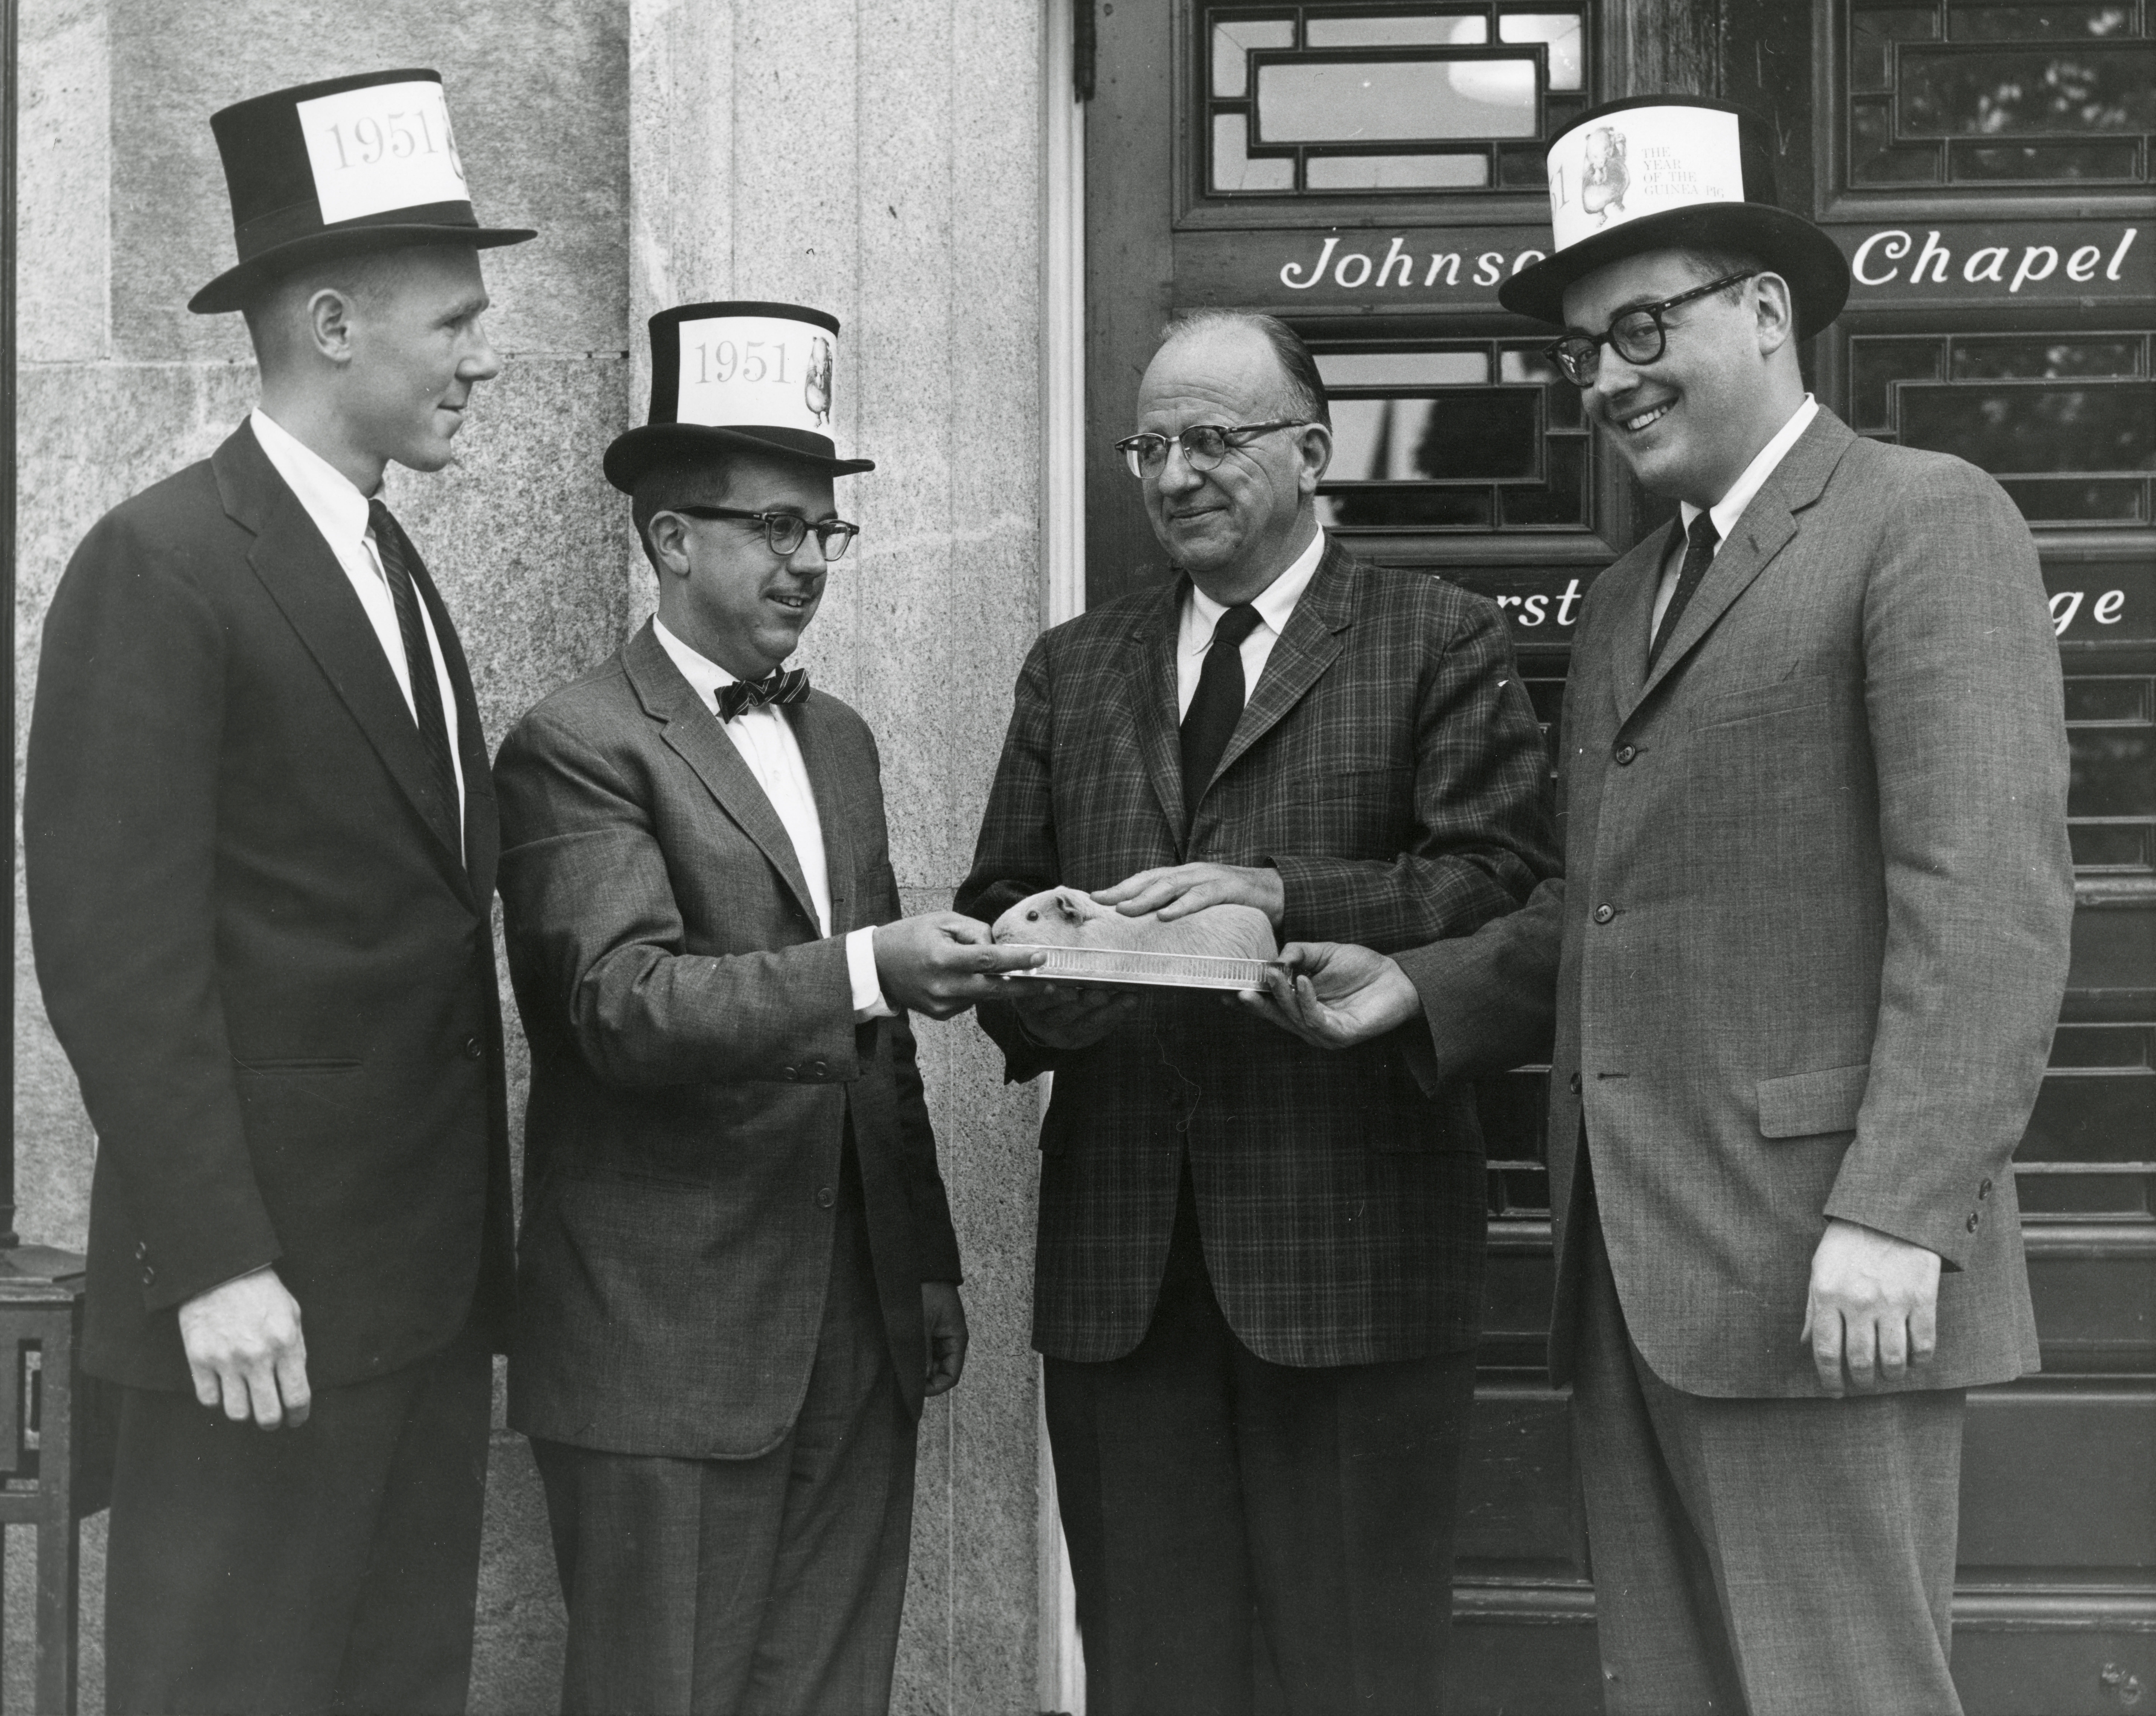 Photograph of three men in top hats with guinea pig images on them, presenting a guinea pig on a tray to a fourth man in front of Johnson Chapel.